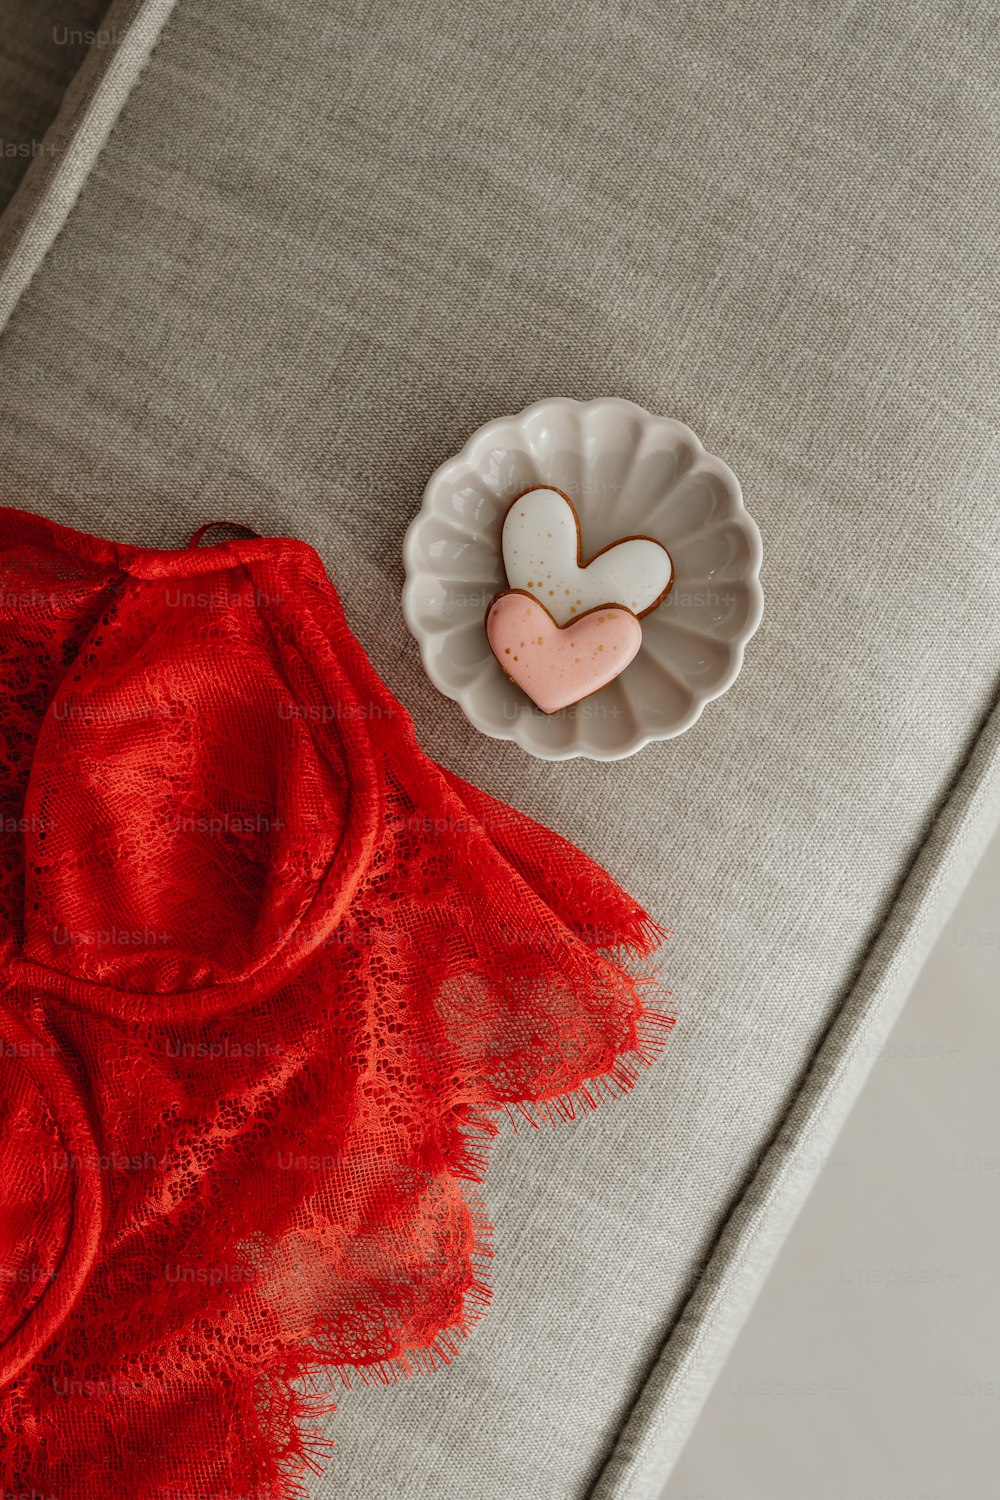 a heart shaped cookie sitting on a plate next to a red dress